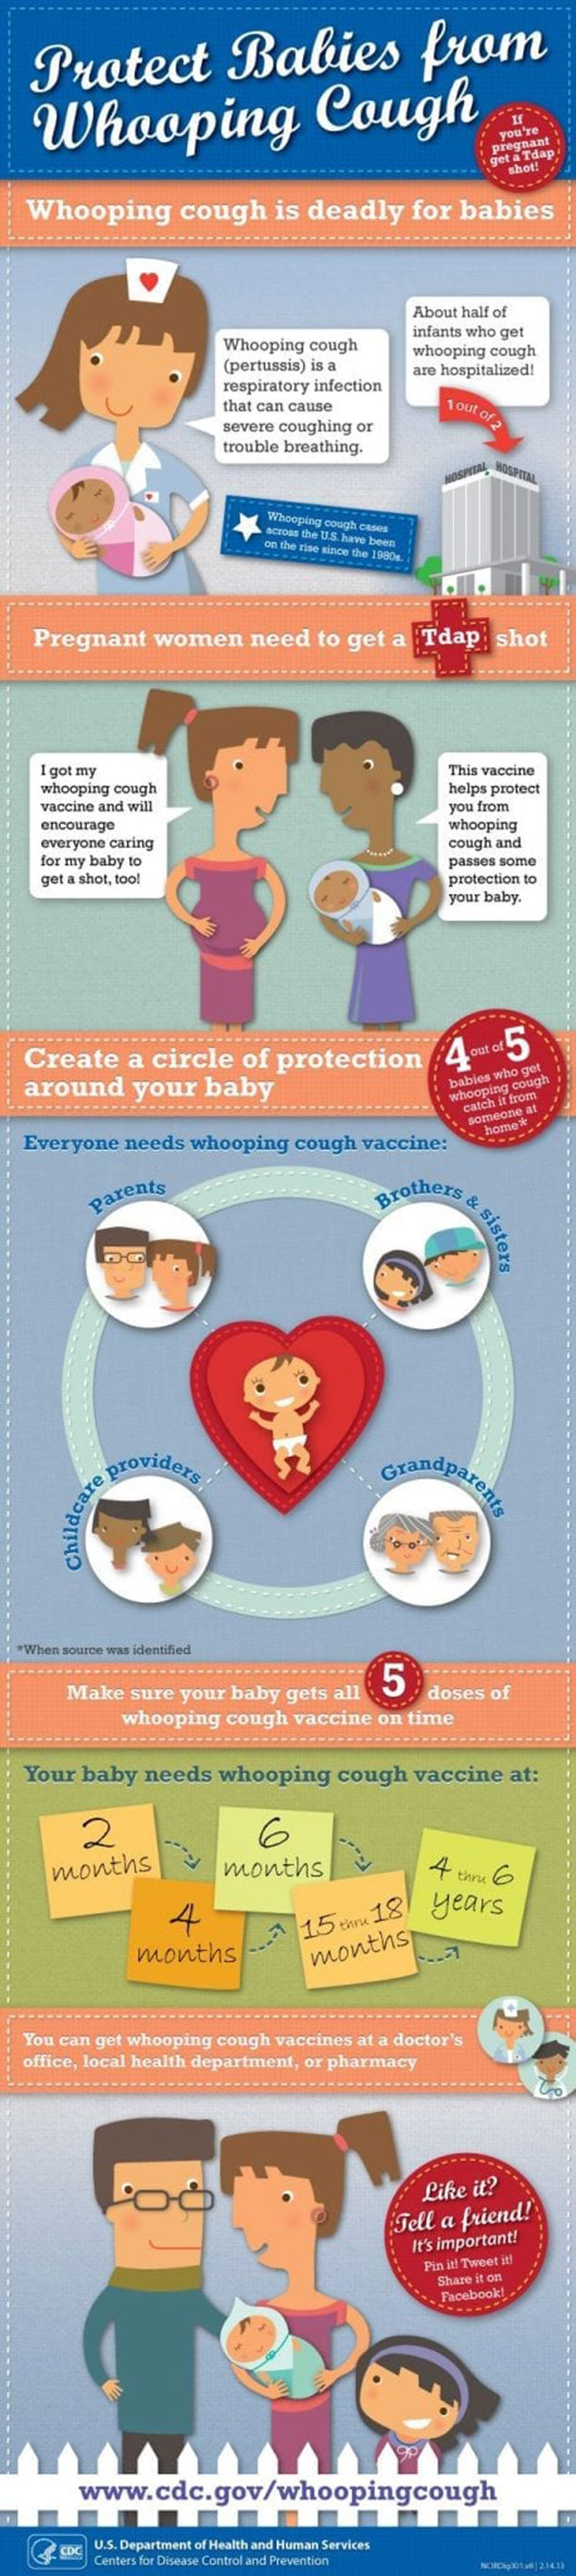 protect babies from whooping cough. Infographic: CDC/Pinterest.com